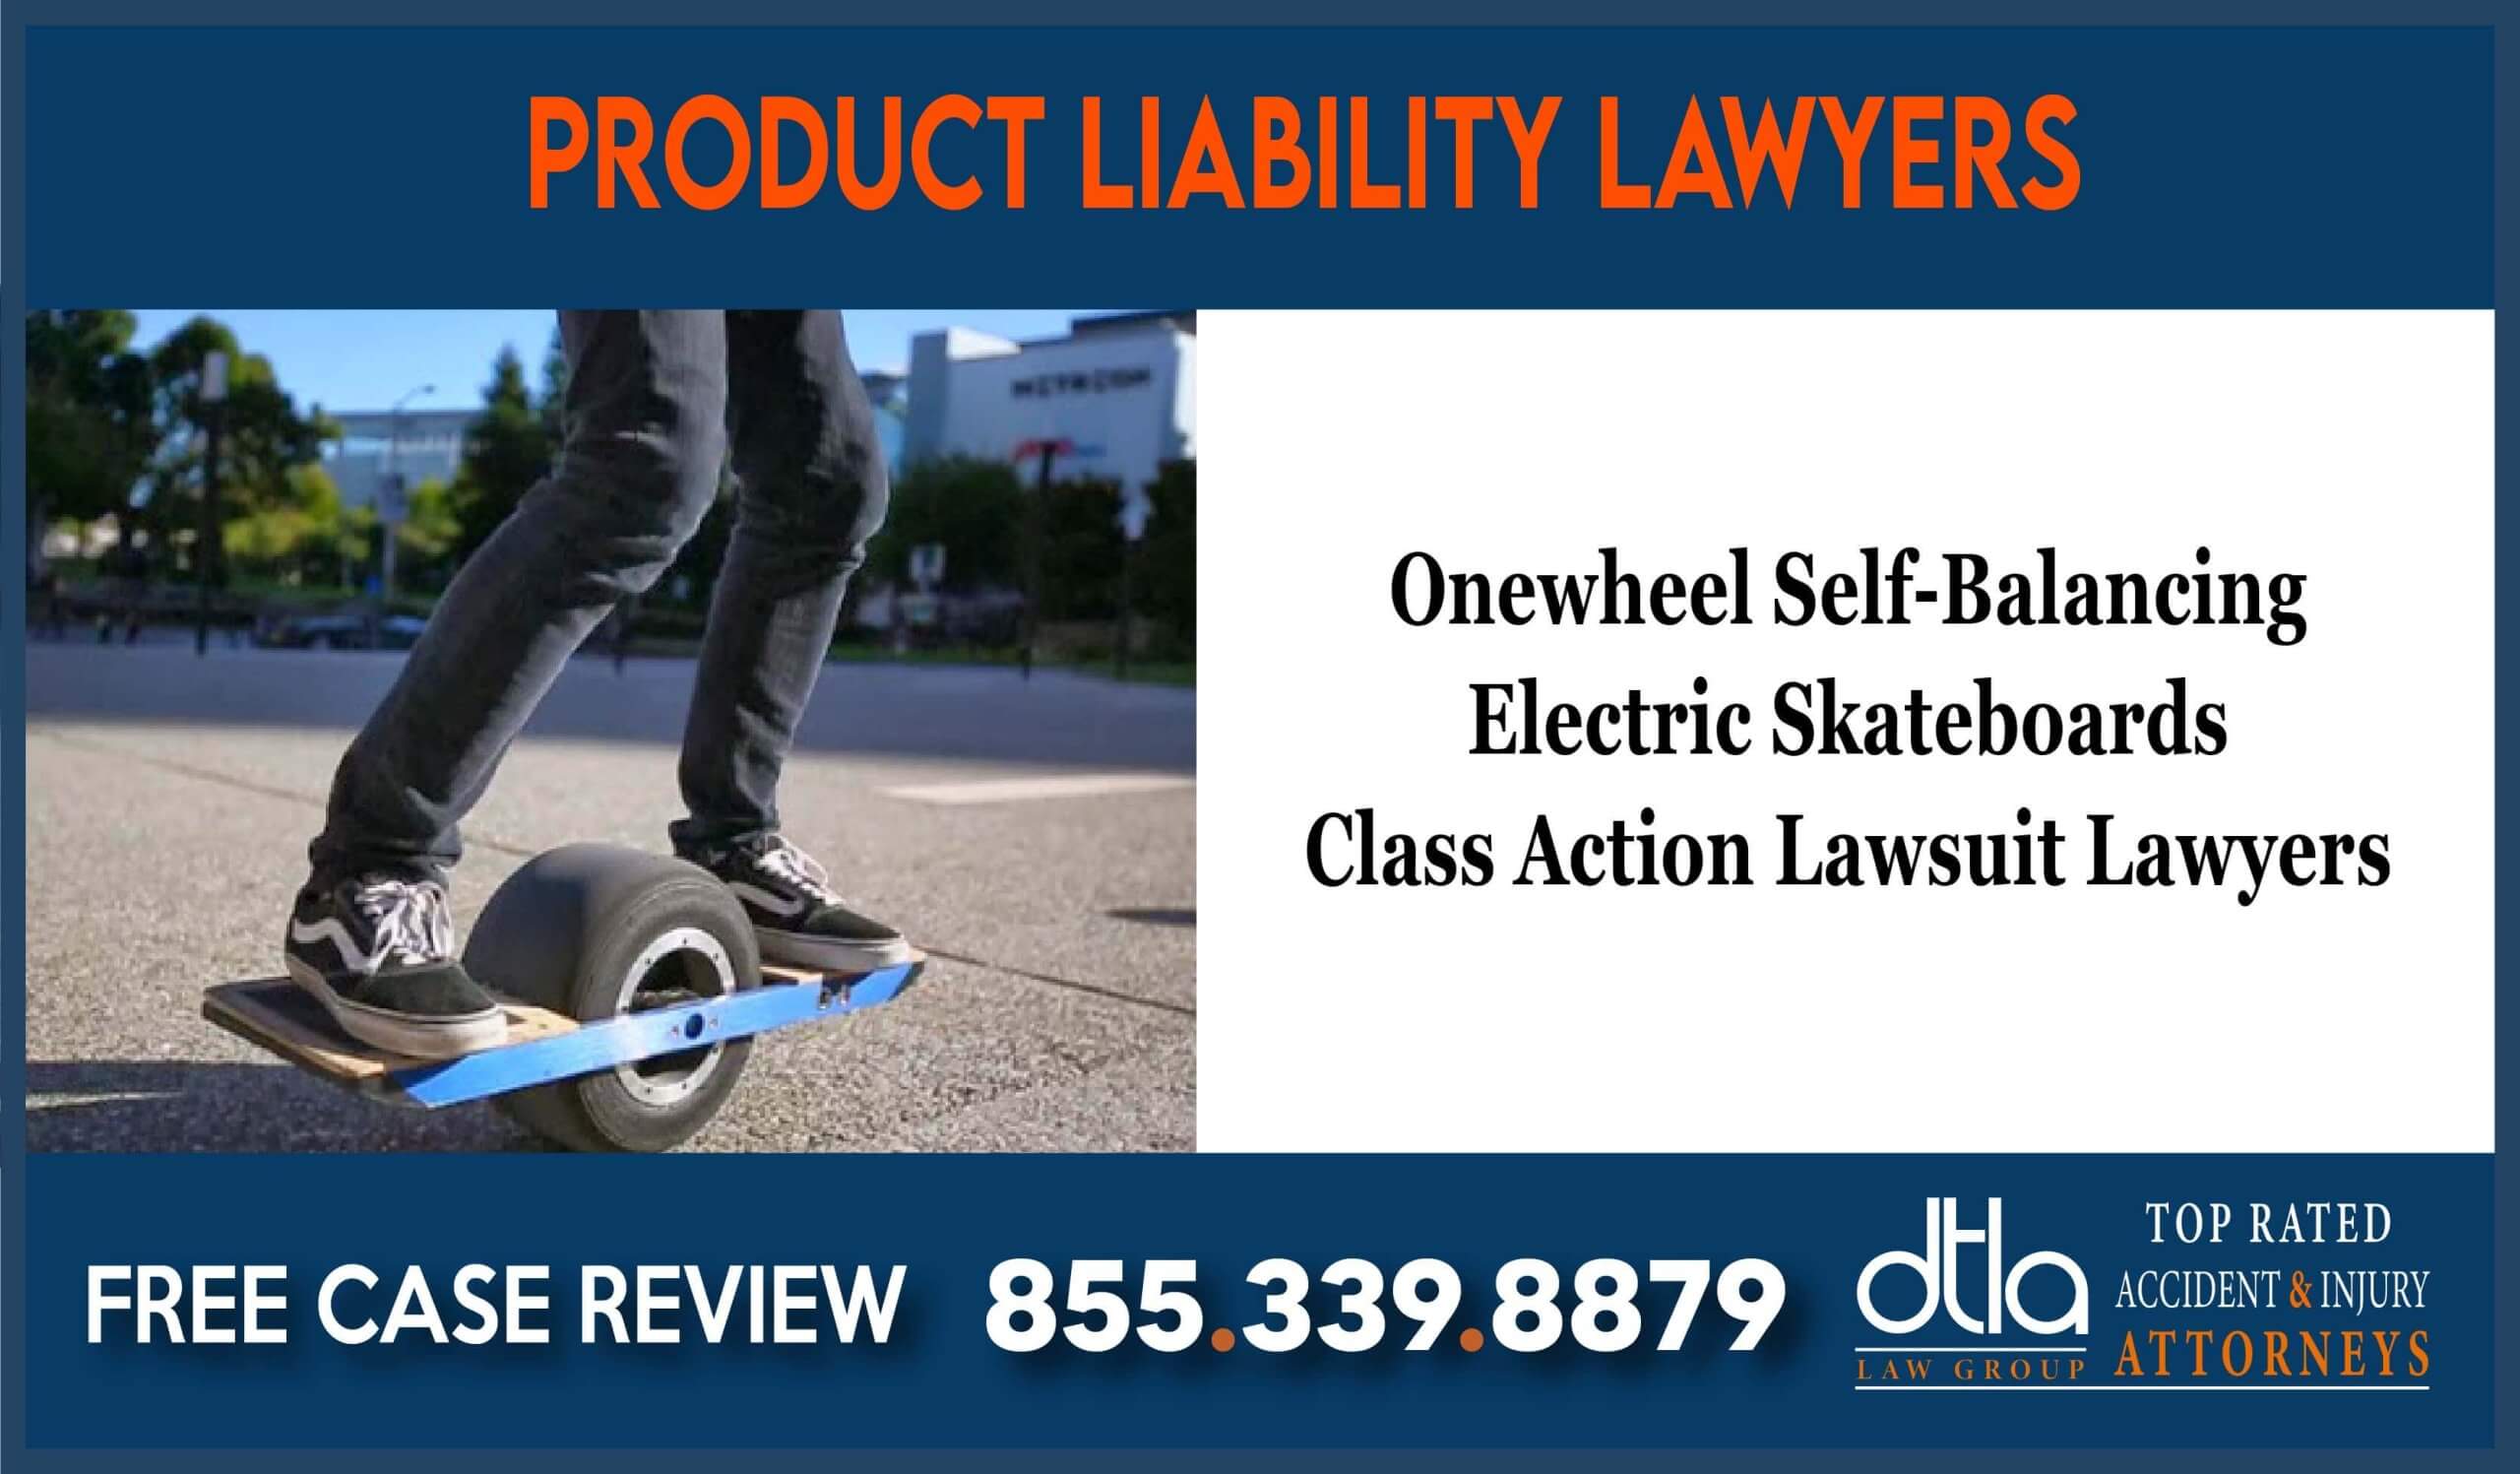 Onewheel Self-Balancing Electric Skateboards Class Action Lawsuit Lawyers sue compensation incident liability